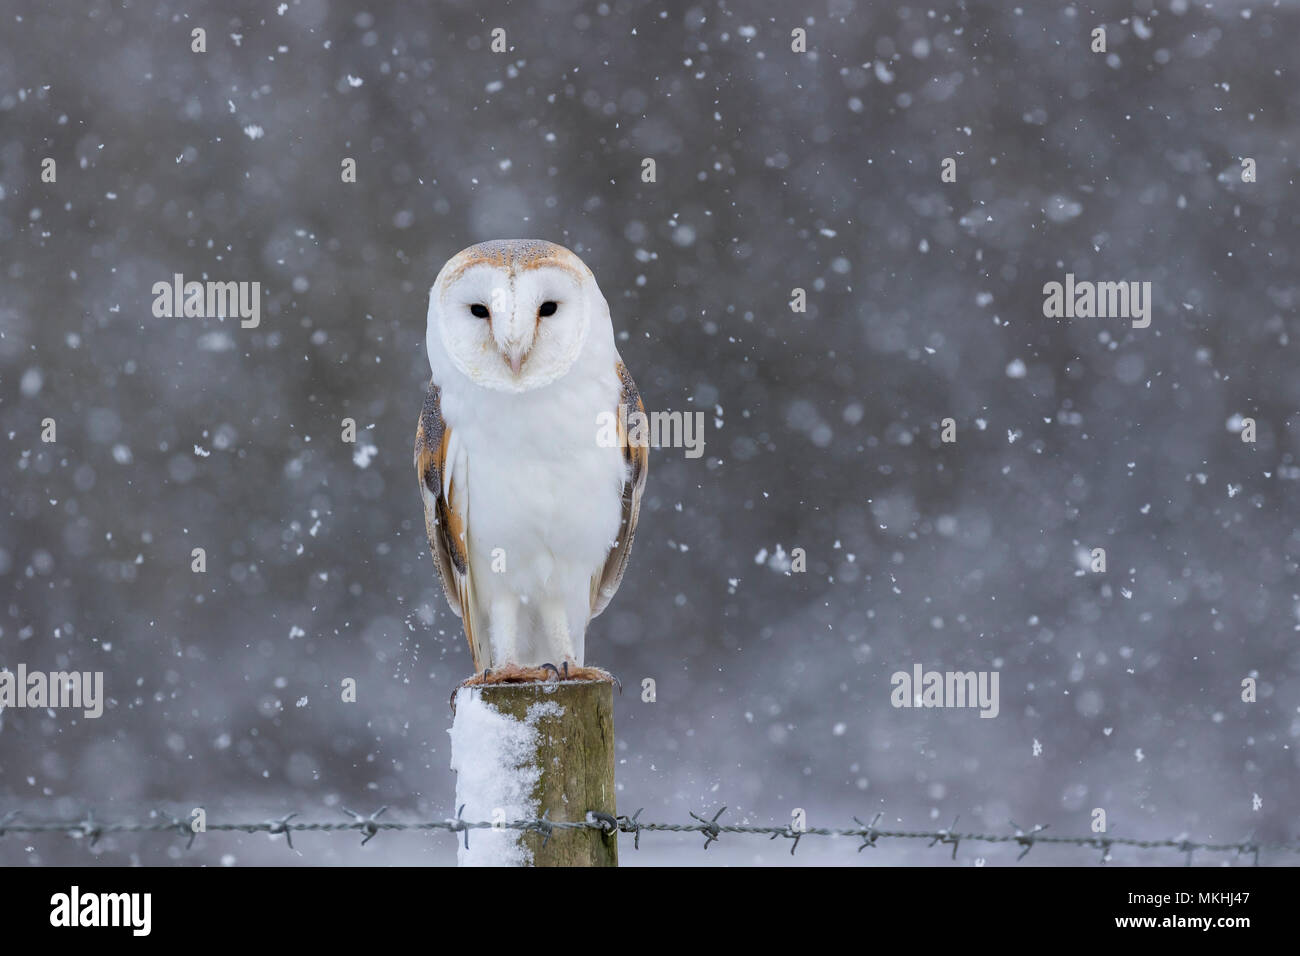 Barn owl (Tyto alba) perched on a post while snowing, England Stock Photo